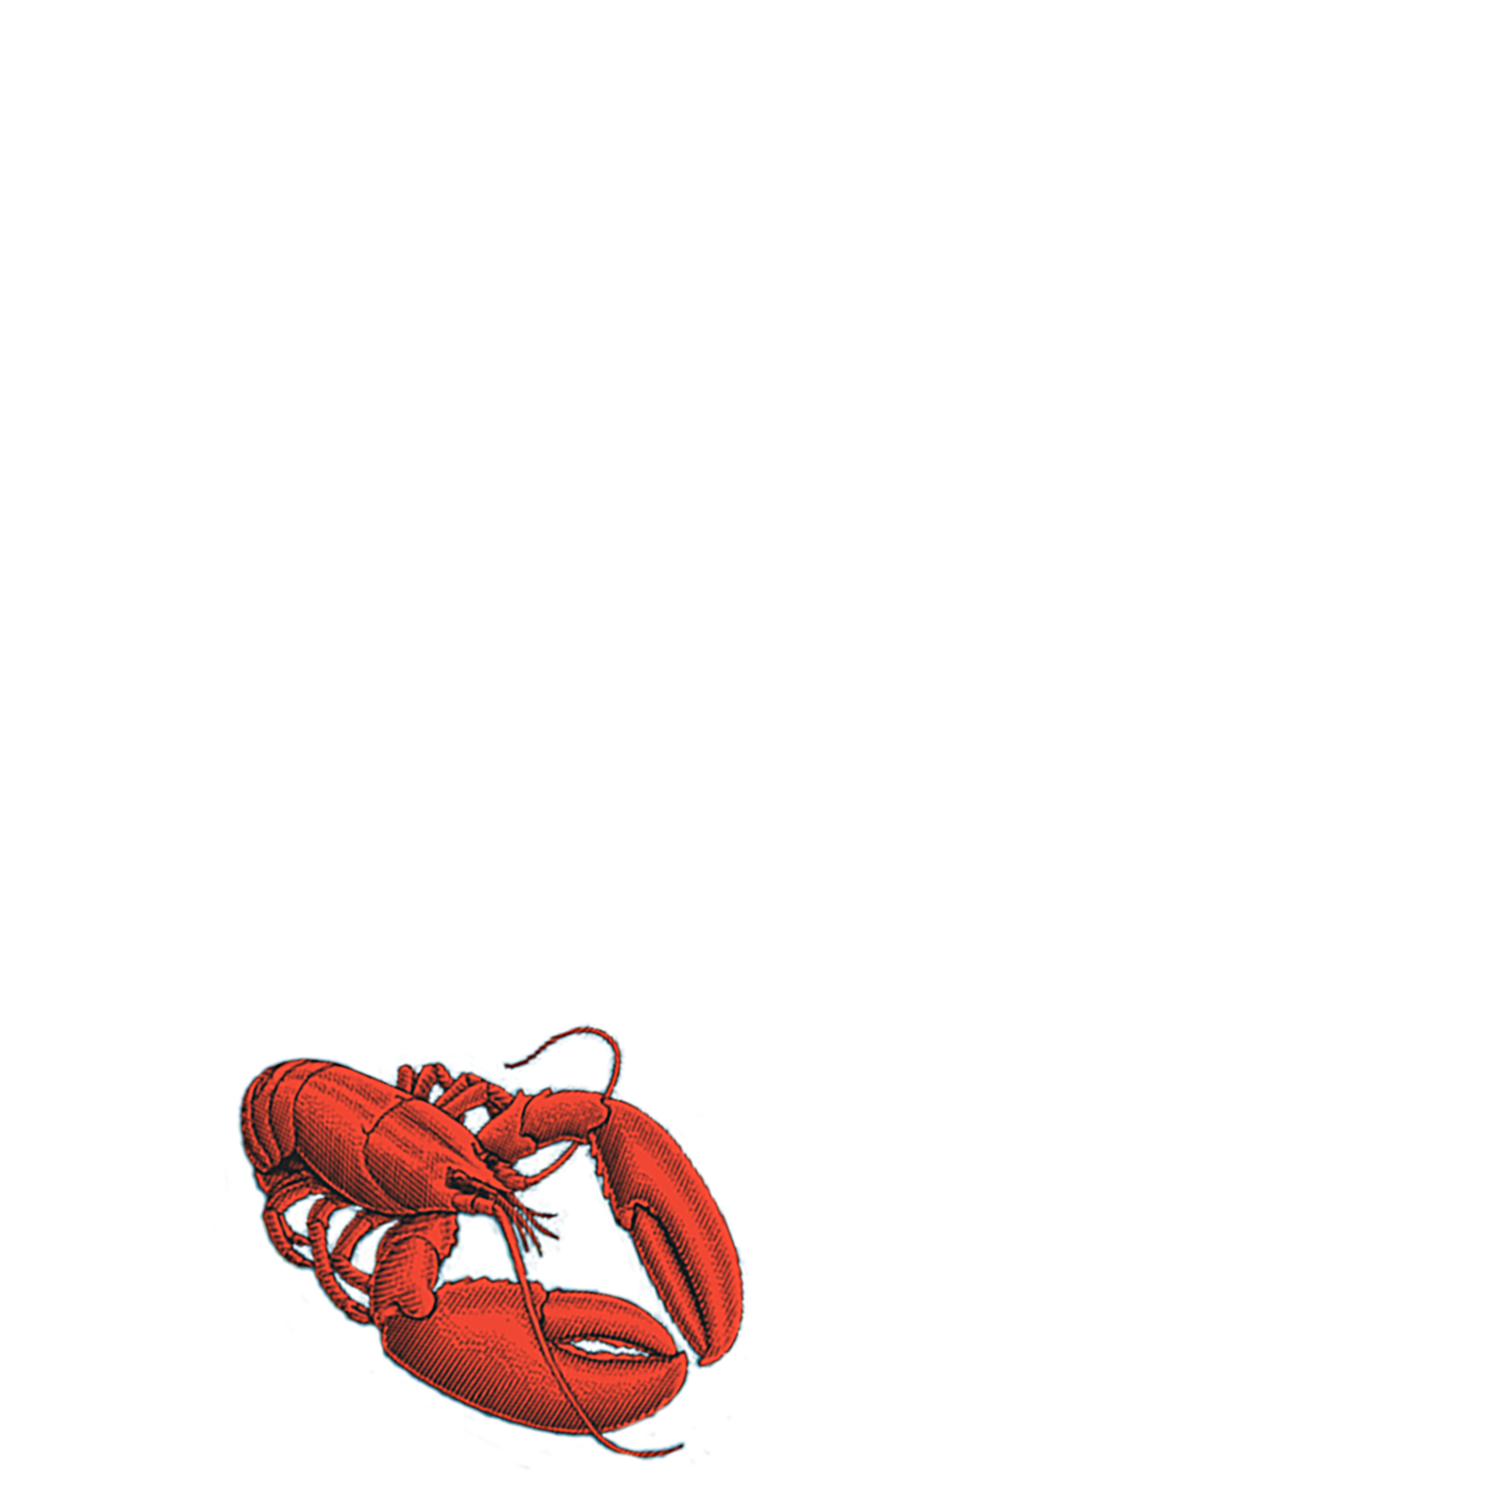 Boone's Fish House & Oyster Room